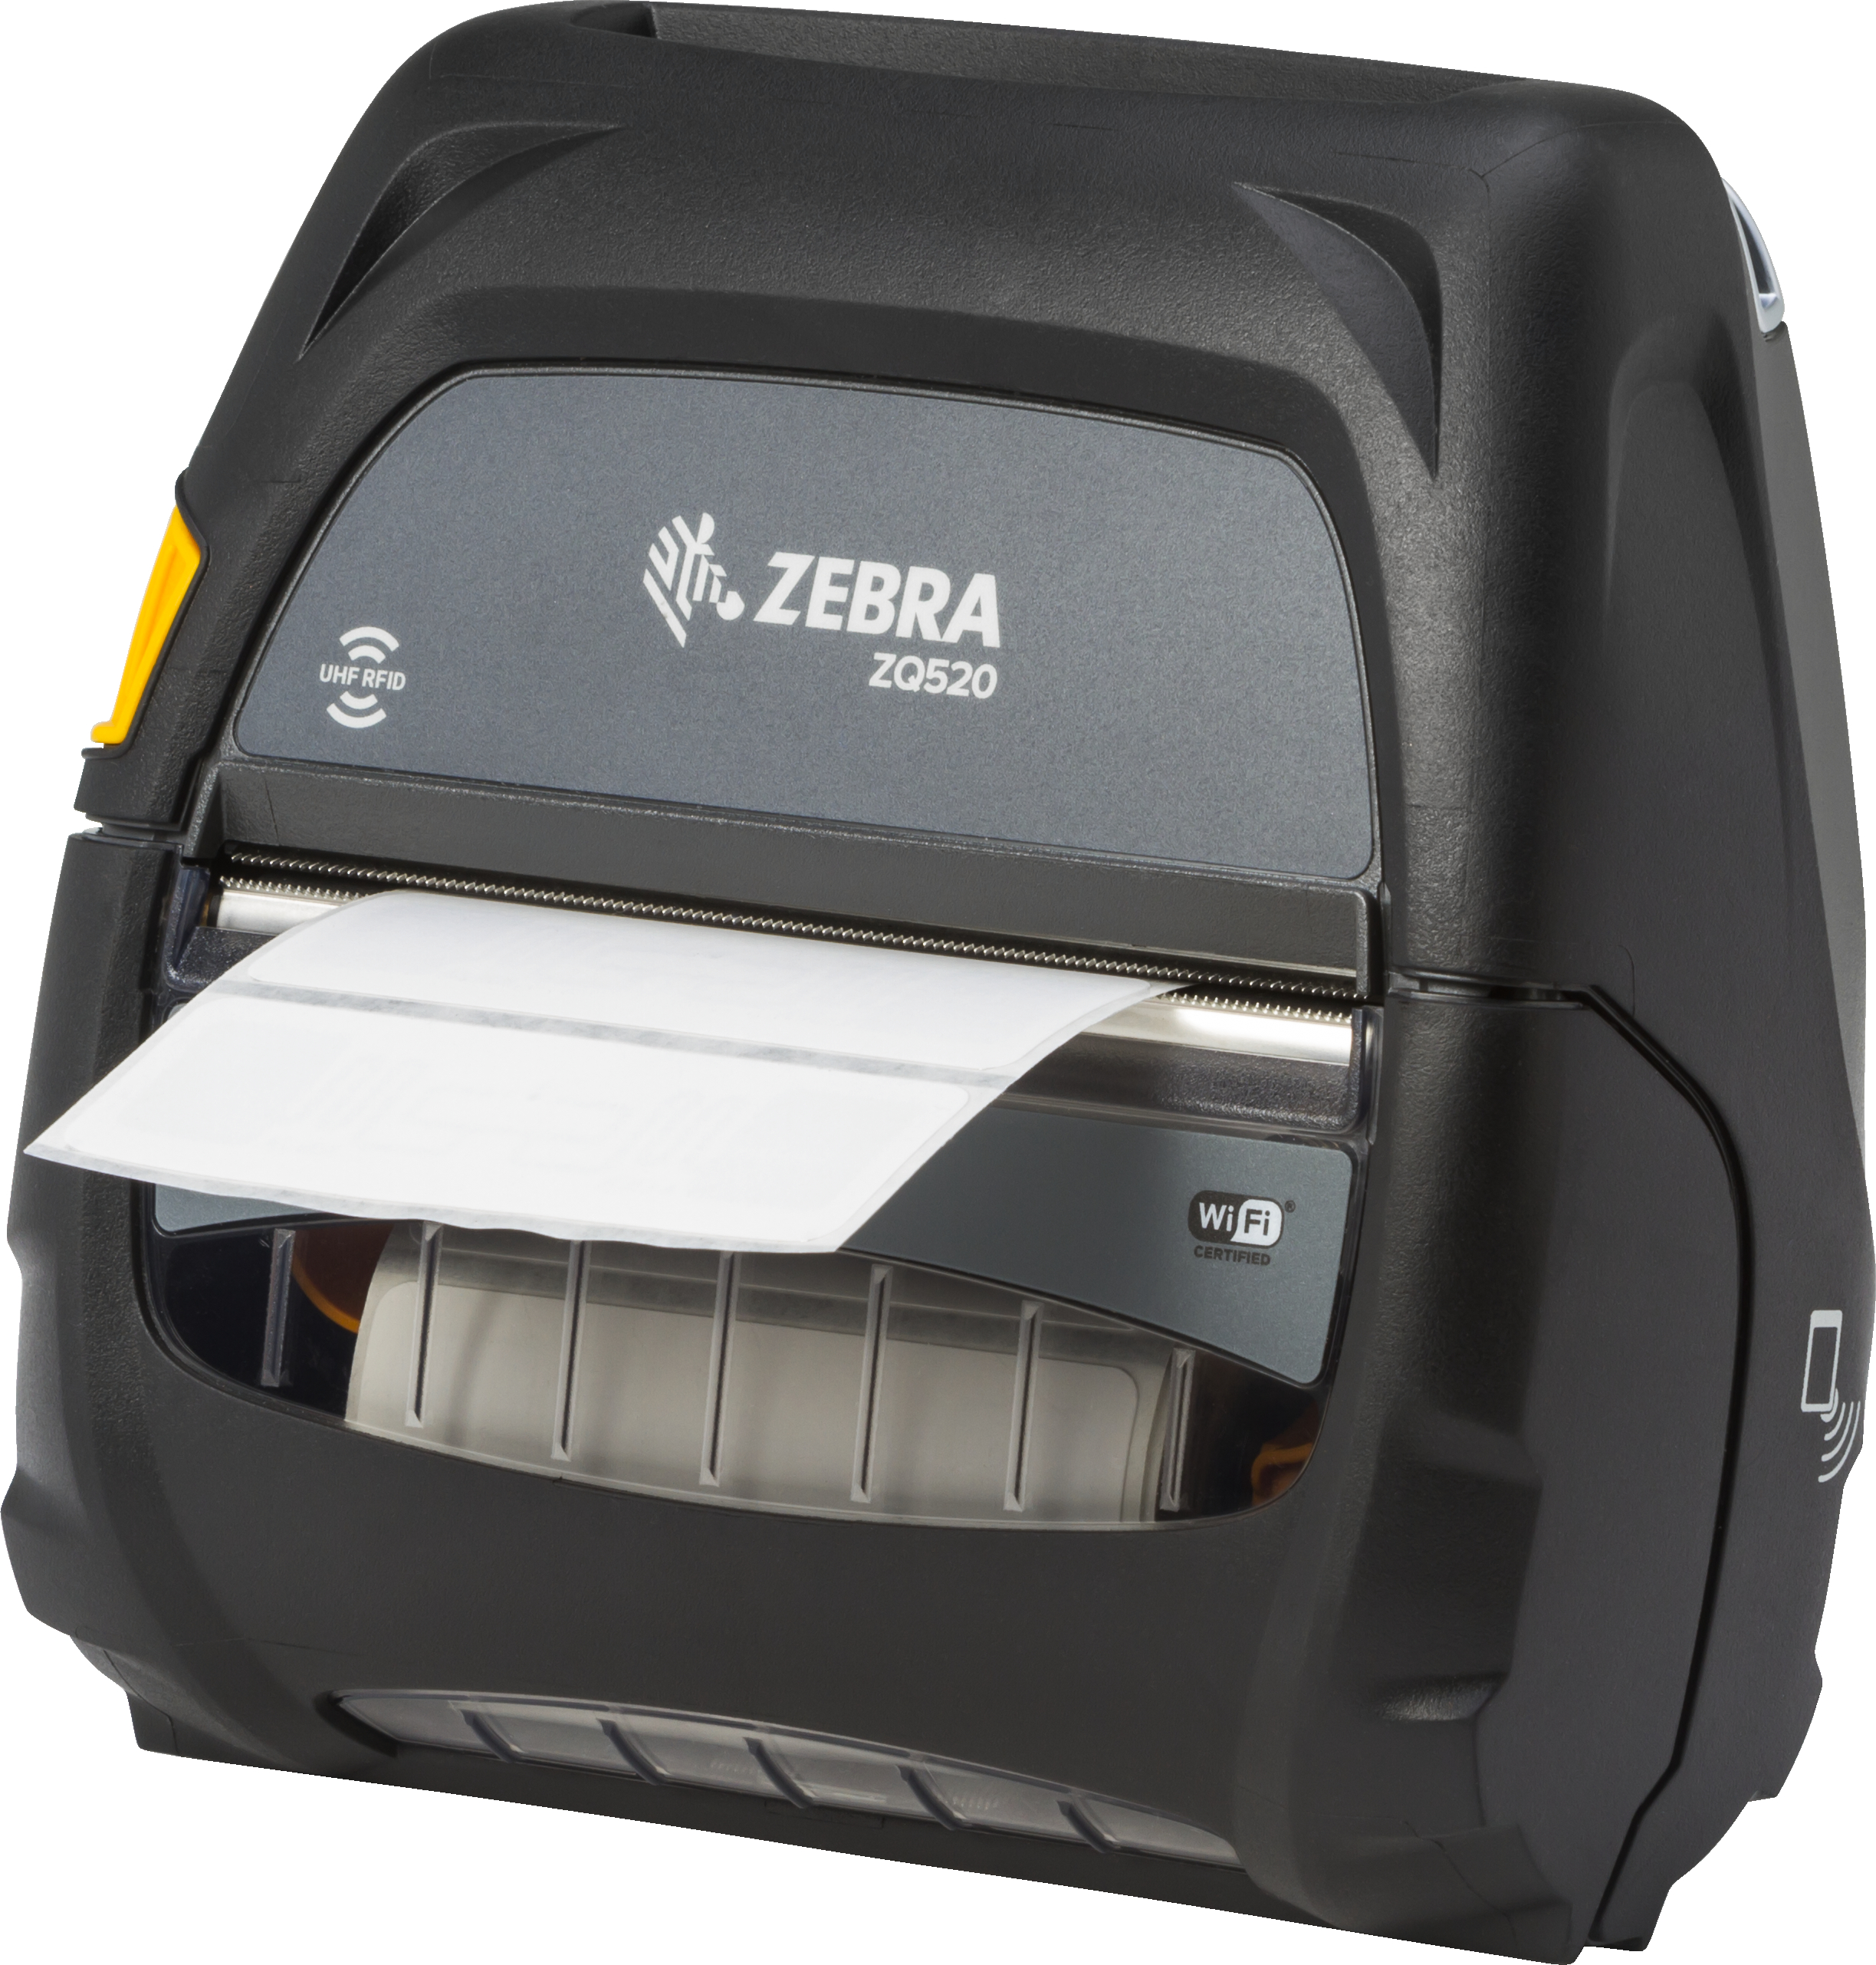 Zebra Rfid Printers Track Manage And Optimize Assets 6840